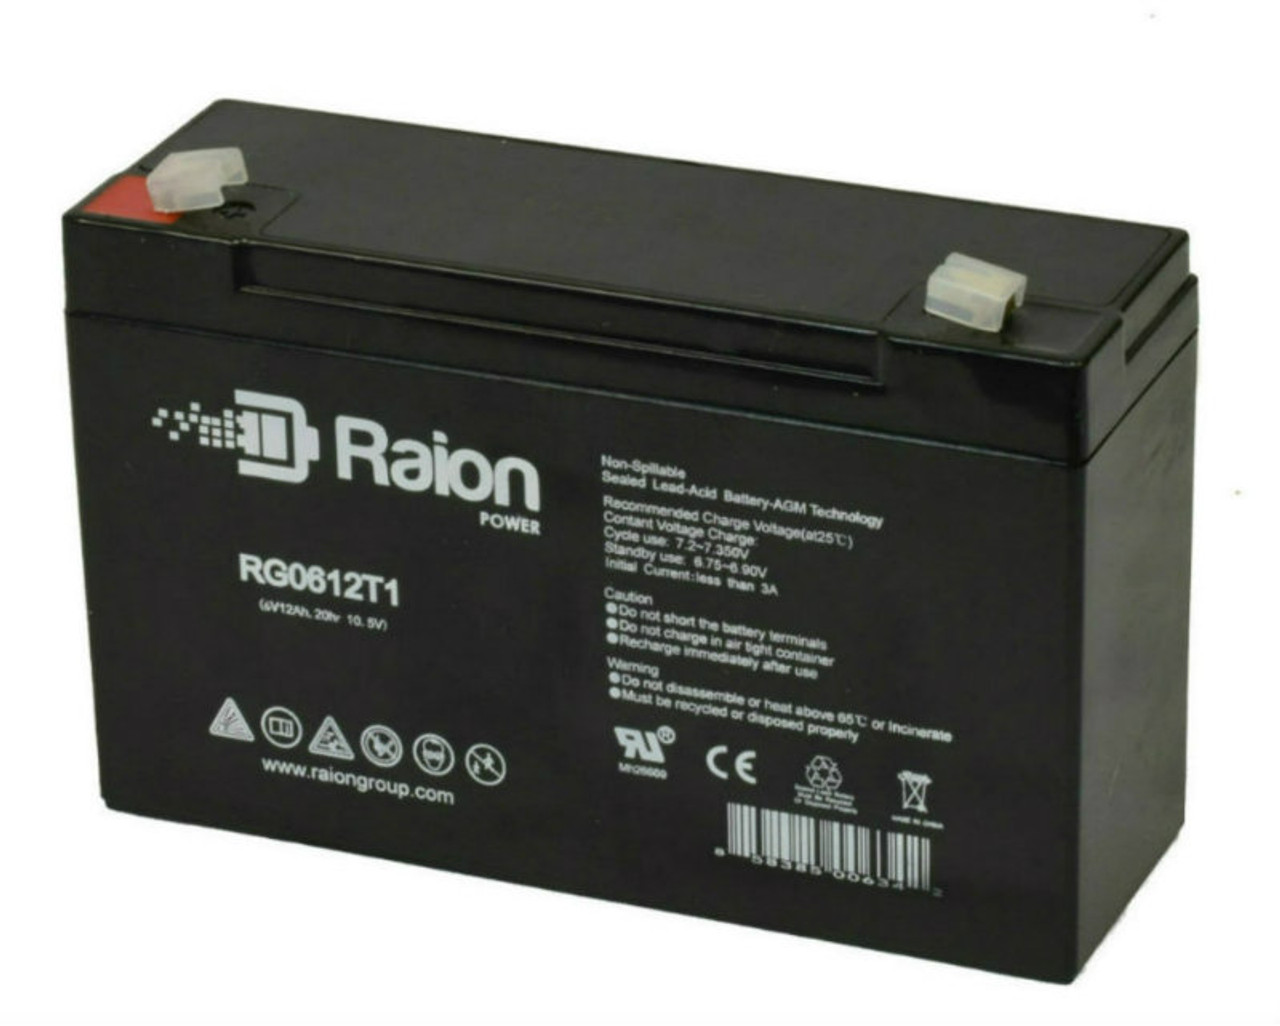 Raion Power RG06120T1 Replacement 6V 12Ah Emergency Light Battery for Big Beam 2CL6S8